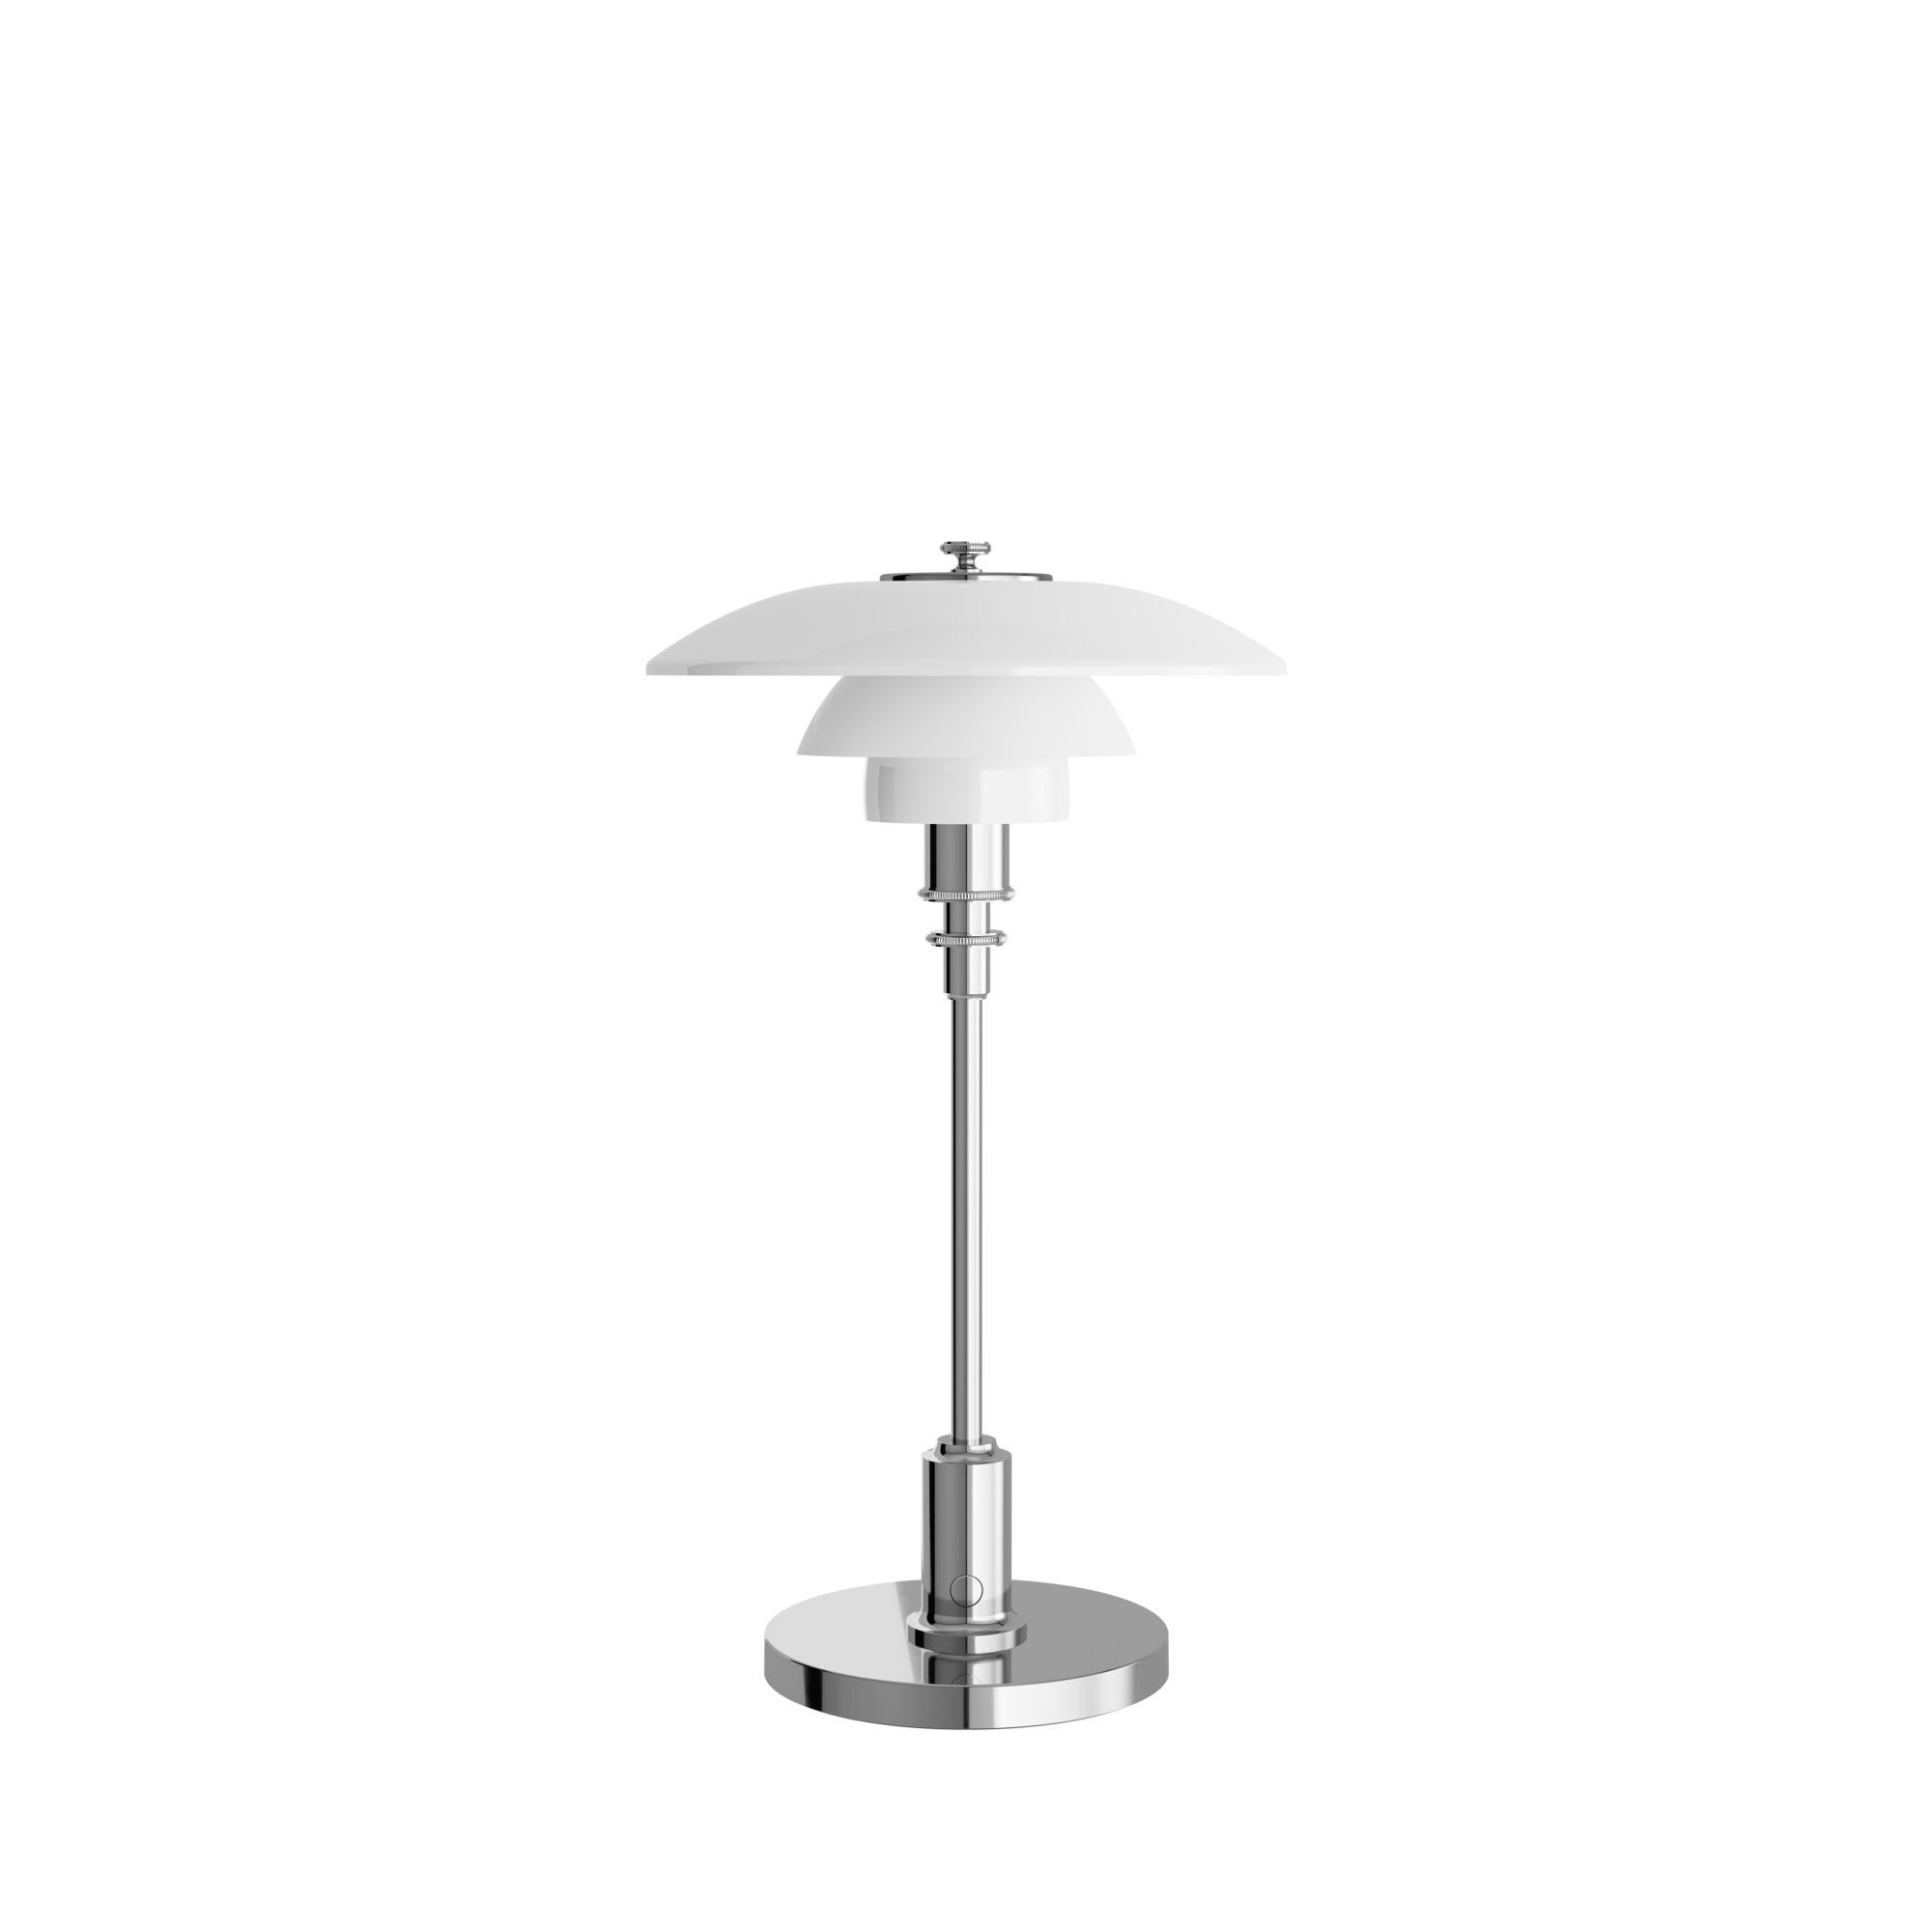 Poul Henningsen PH 2/1 Portable Glass Table Lamp for Louis Poulsen in Chrome In New Condition For Sale In Glendale, CA